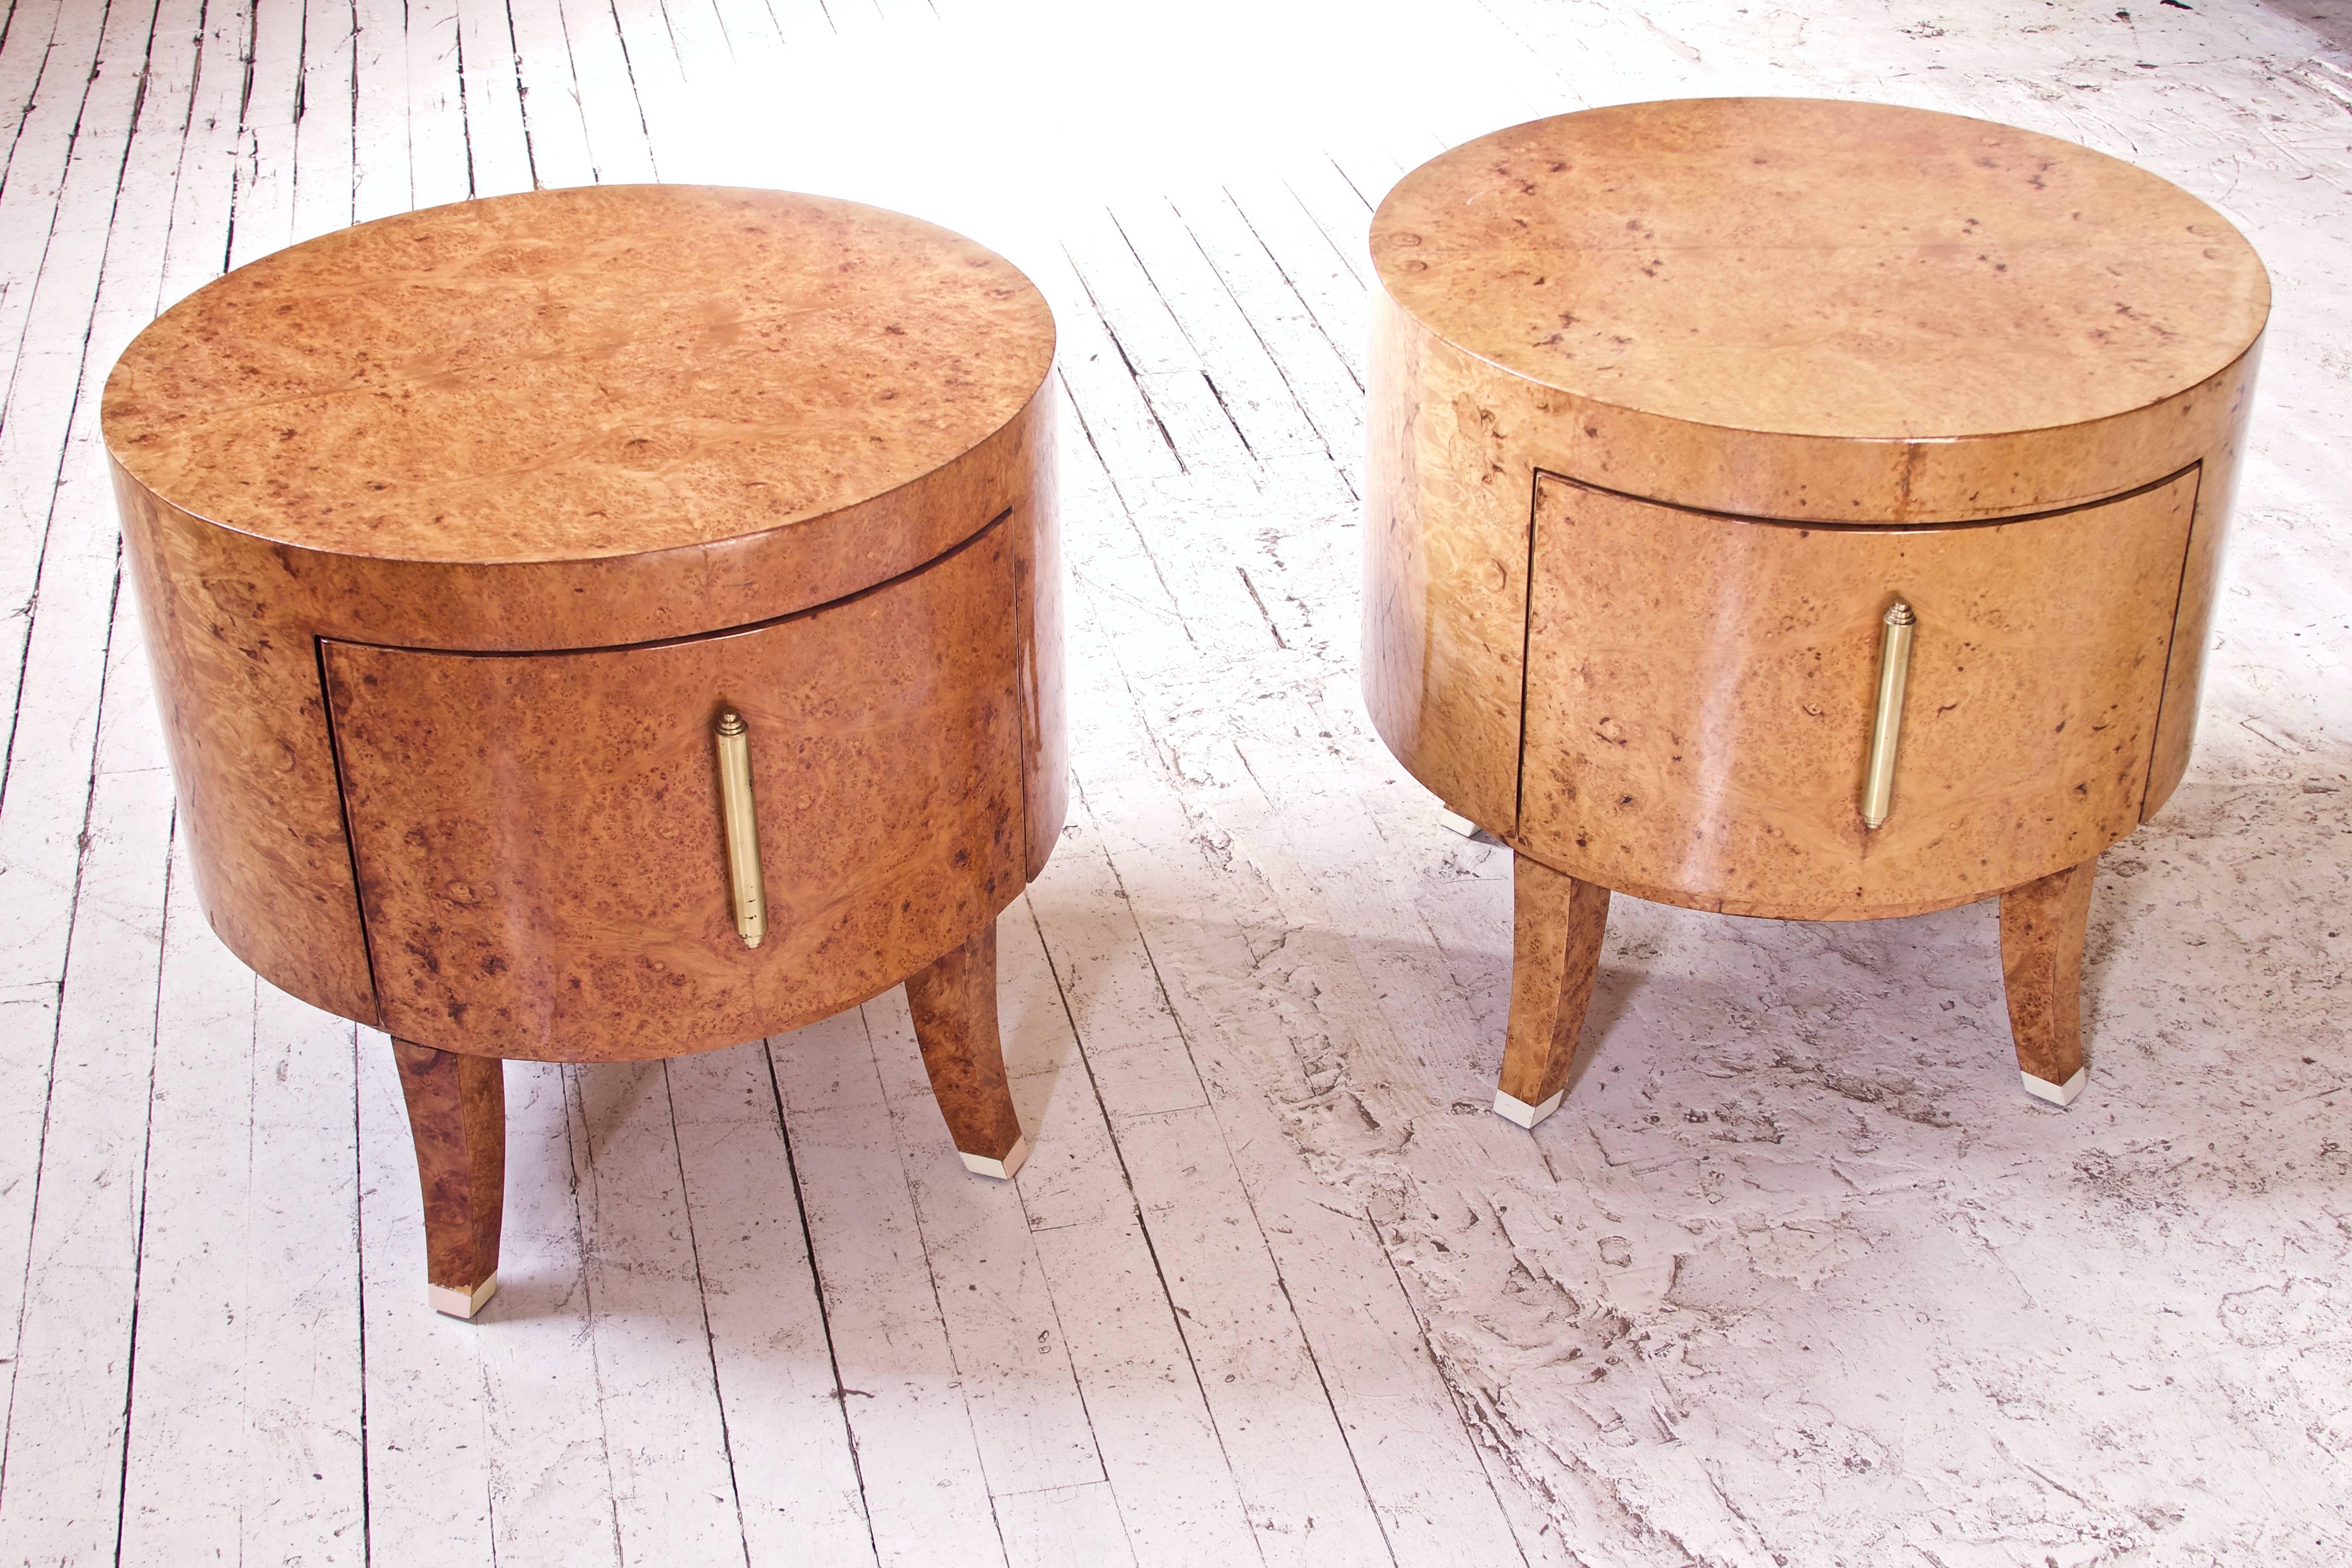 A well-made pair of custom-made vintage end tables or nightstands in the Biedermeier style of the 19th century. These elegant pieces feature richly figured diamond-matched birch burl veneer, white accents at the feet of the splayed saber legs, and